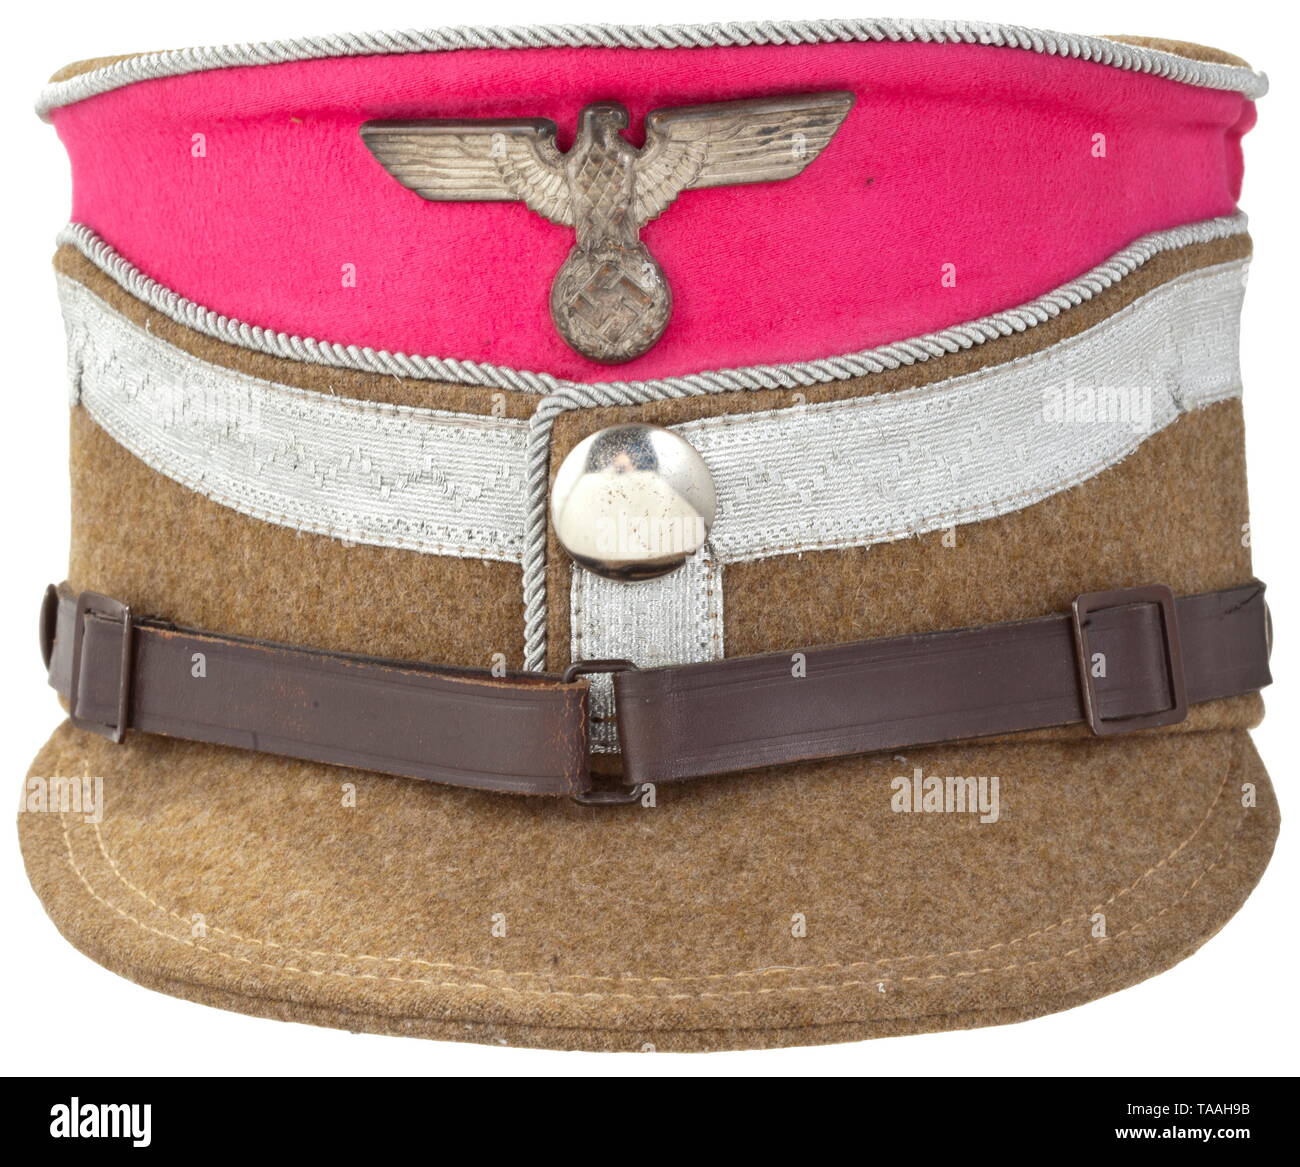 A kepi for Obergruppen-/Gruppenführer of the Ostmark and Südmark units Cap of brown gabardine with band in antique-pink, the top with surrounding silver cord, additional silver cord and 2 cm wide silver braid with band of meander ornament as rank designation of a Gruppenführer or Obergruppenführer woven into it. Silver metal insignia, brown chinstrap. Grey cotton lining (cap trapezoid), brown leather sweatband with name initials 'EF'. Size circa '55'. Very rare. historic, historical, 20th century, 1930s, 1940s, storm battalion, stormtroopers, armed and uniformed branch of t, Editorial-Use-Only Stock Photo